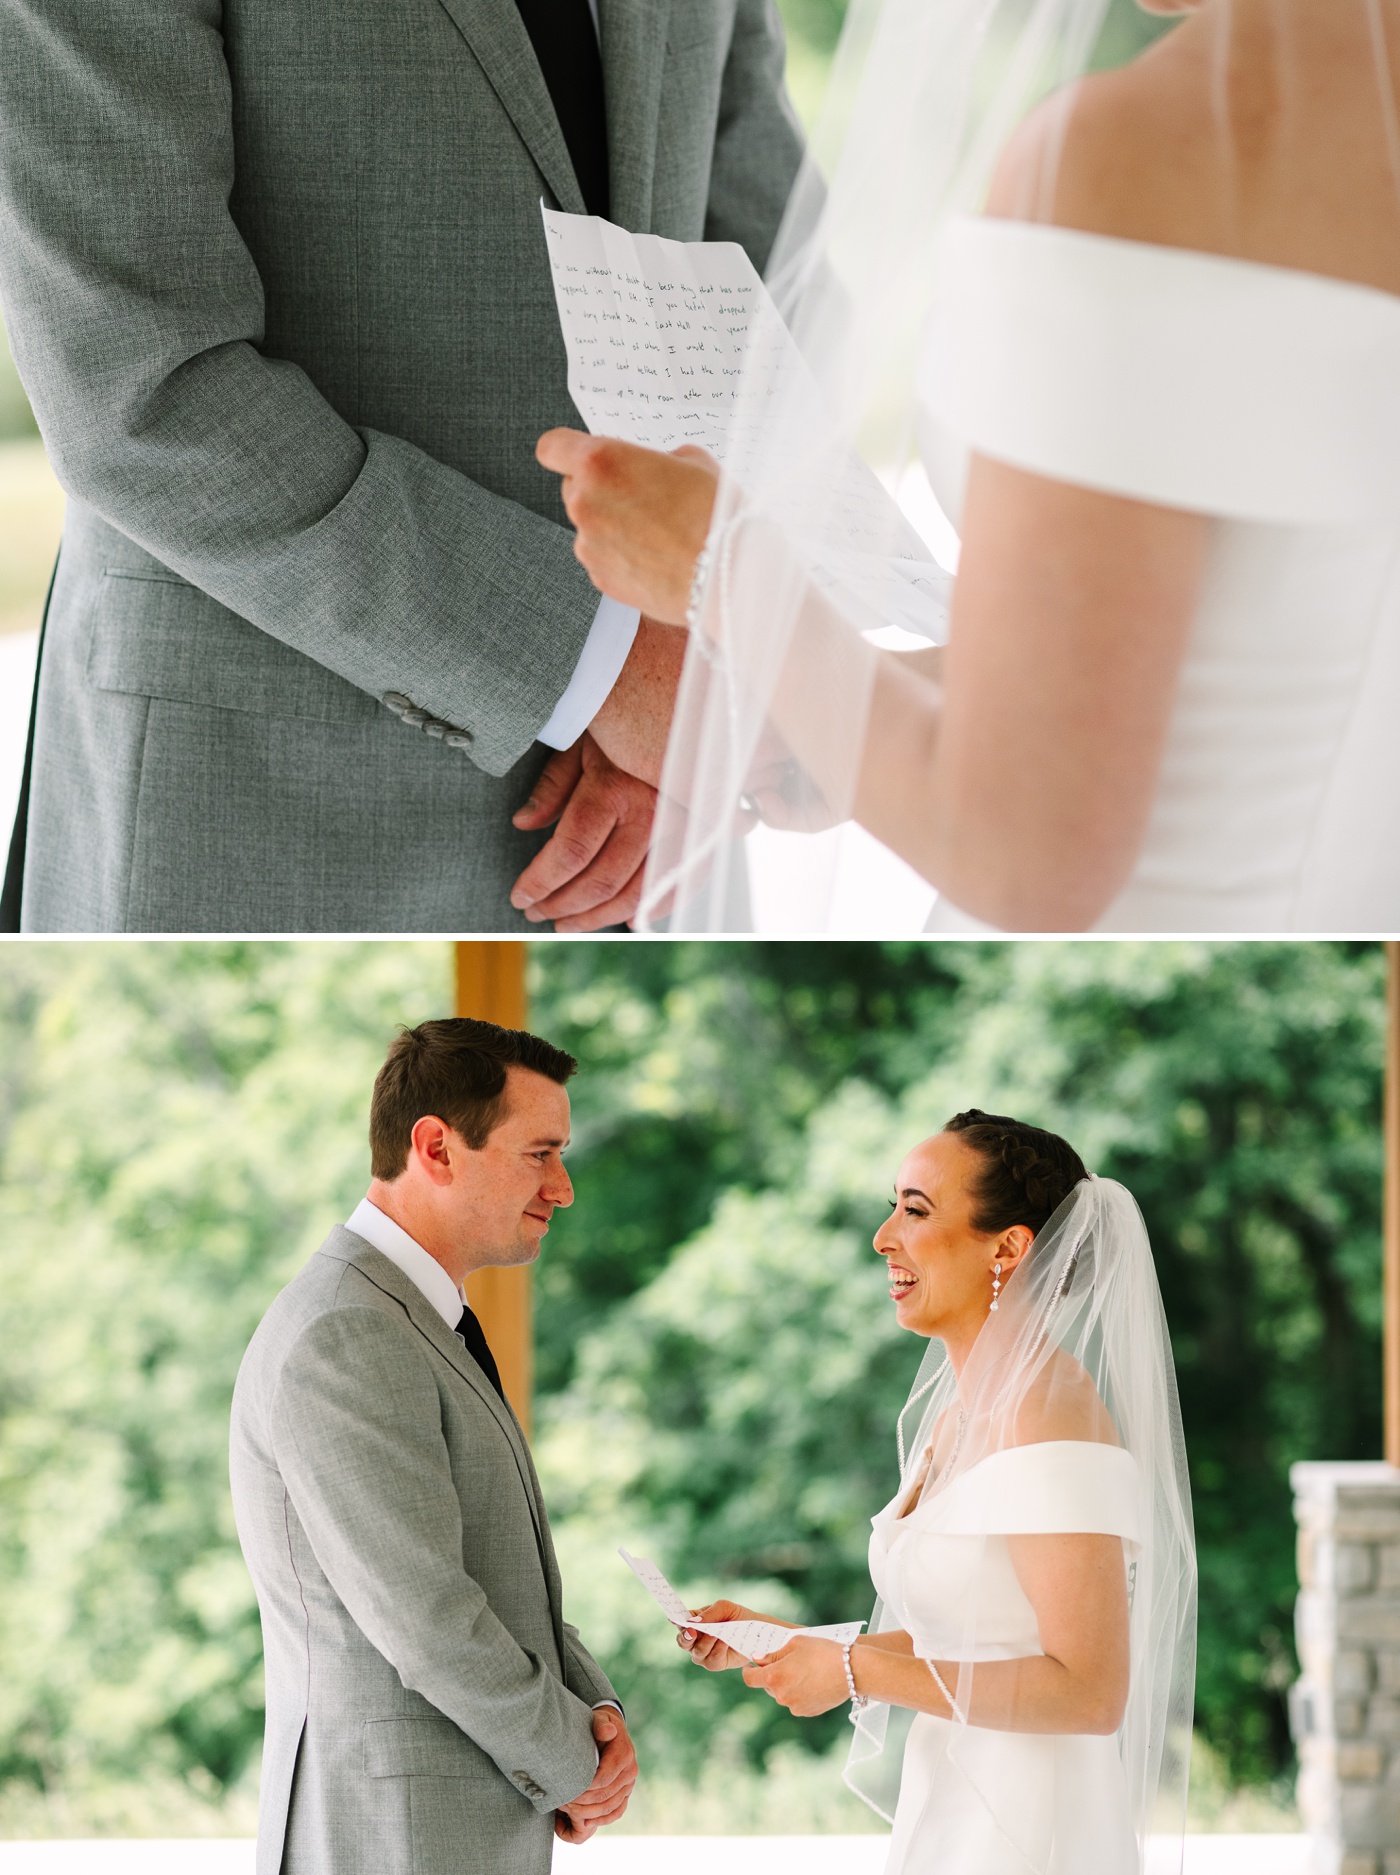 Bride and groom exchanging private wedding vows